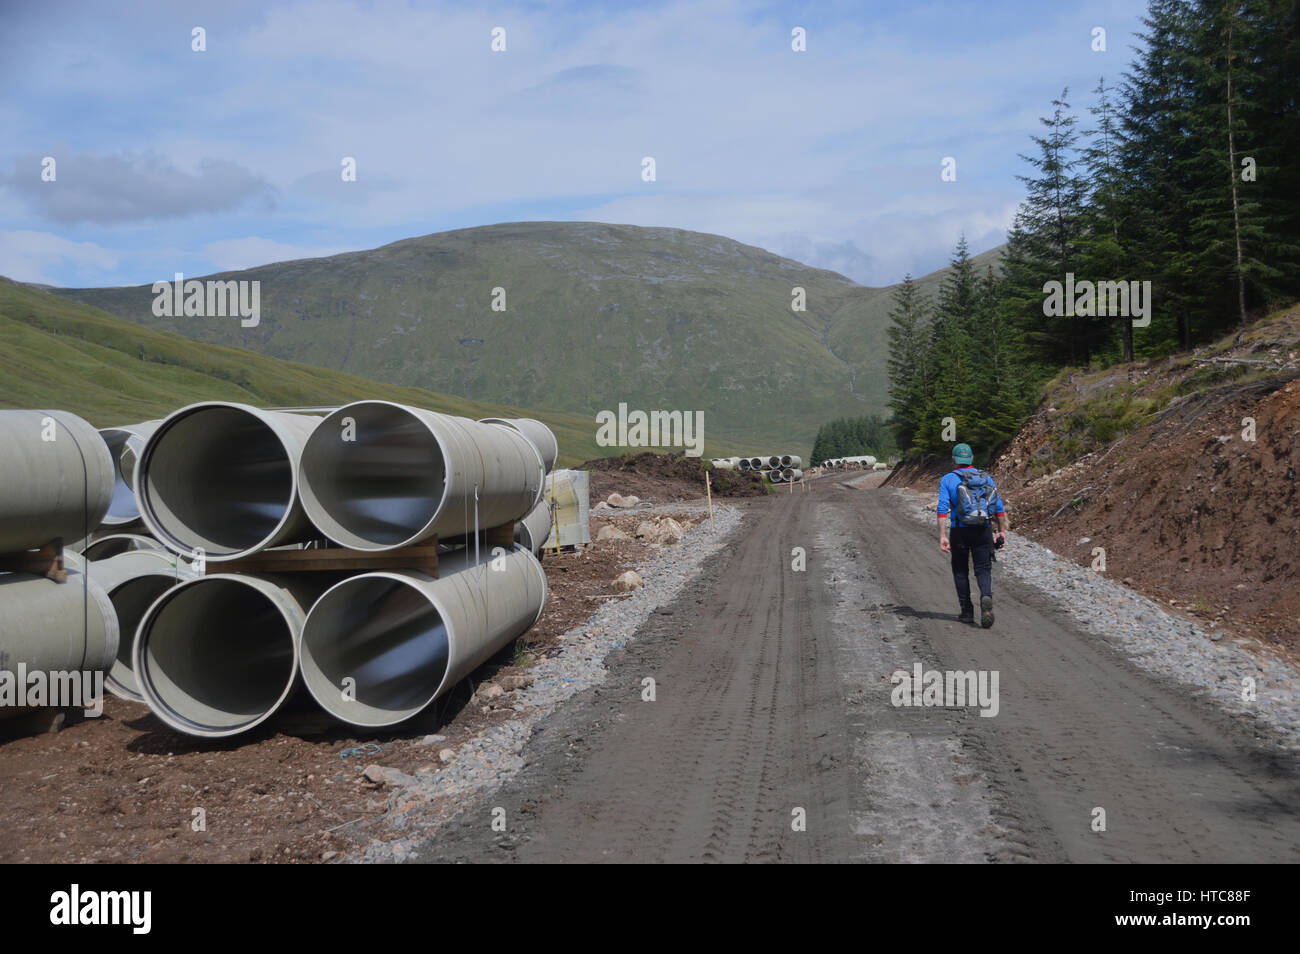 A Lone Male Hillwalker in Gleann Cia-aig Walking Through Constuction Site to the Scottish Mountain Corbett Meall na h-Eilde in the Scottish Highlands. Stock Photo